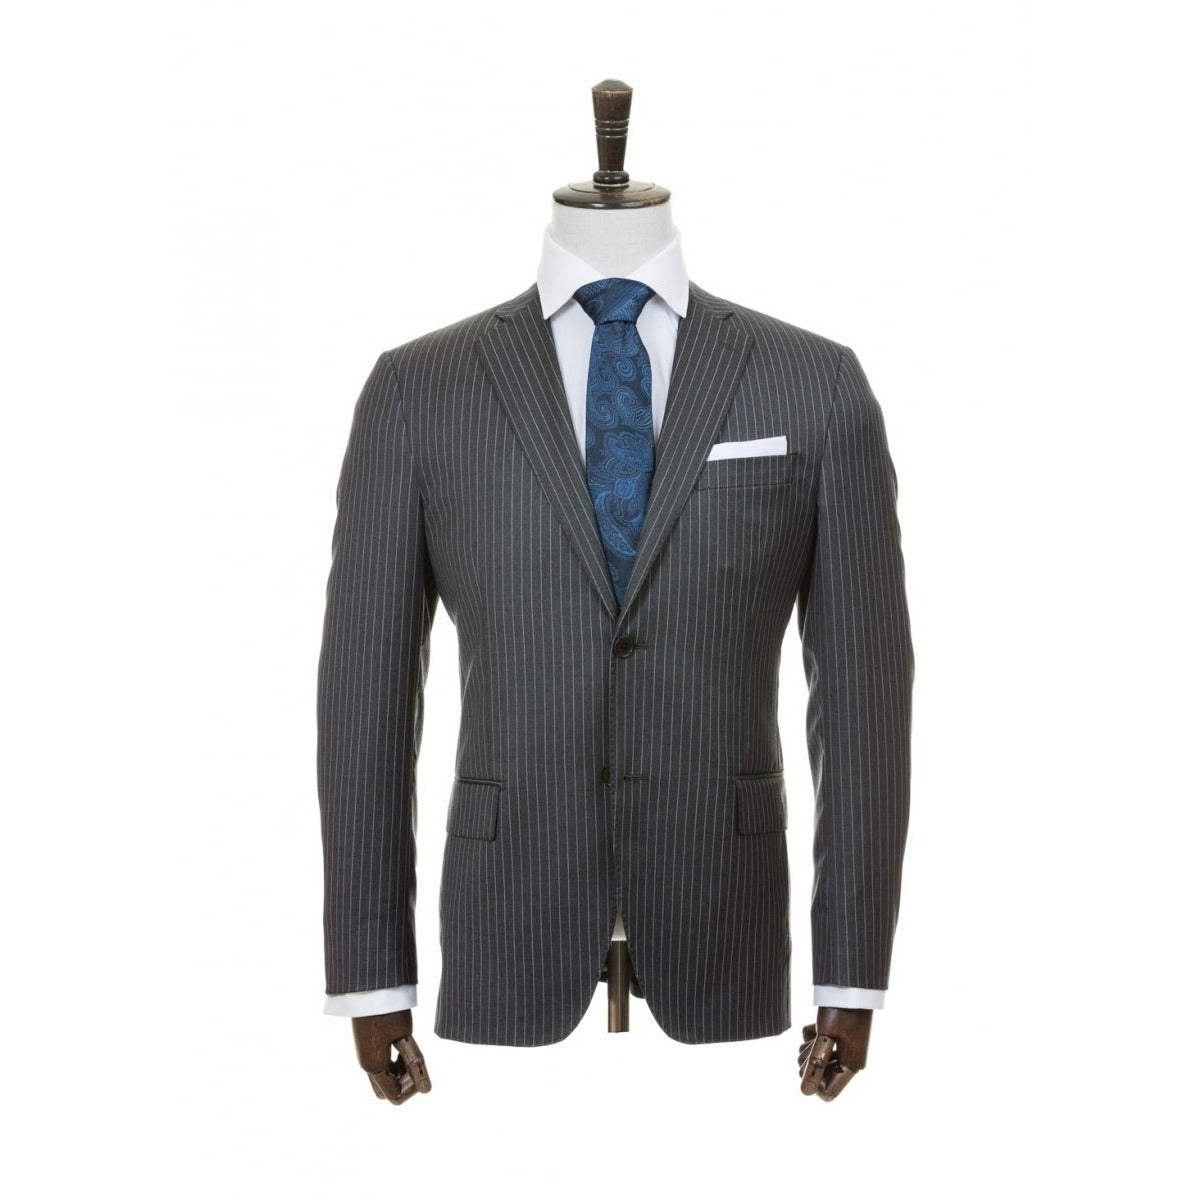 Zegna Cloth - Charcoal Pinstripe Suit - Suit by Urbbana